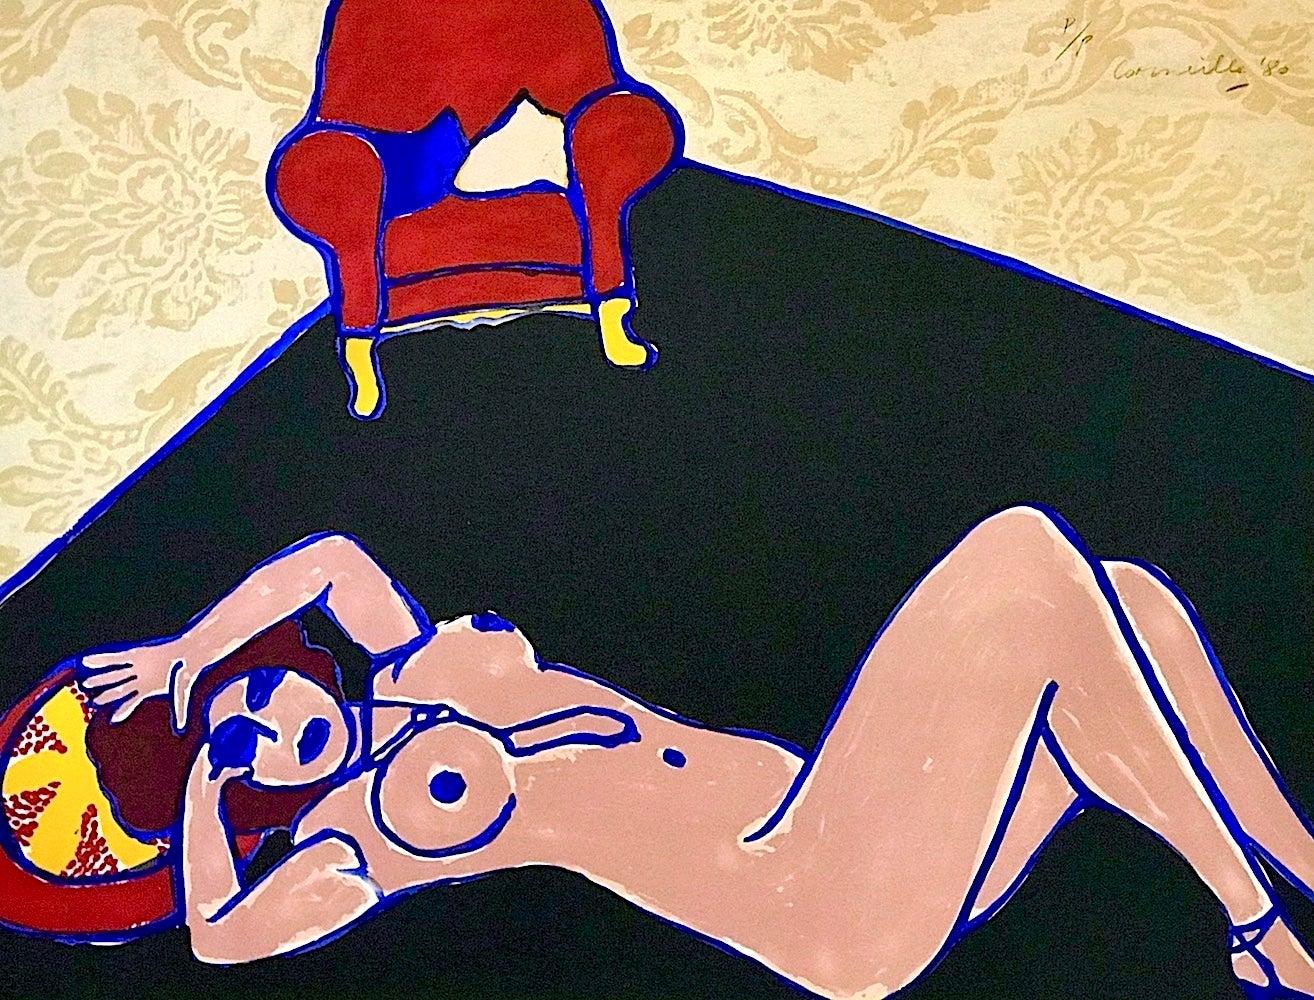 Corneille Nude Print - LE TAPIS NOIR Signed Lithograph, Reclining Nude, Damask Wallpaper, Red Armchair